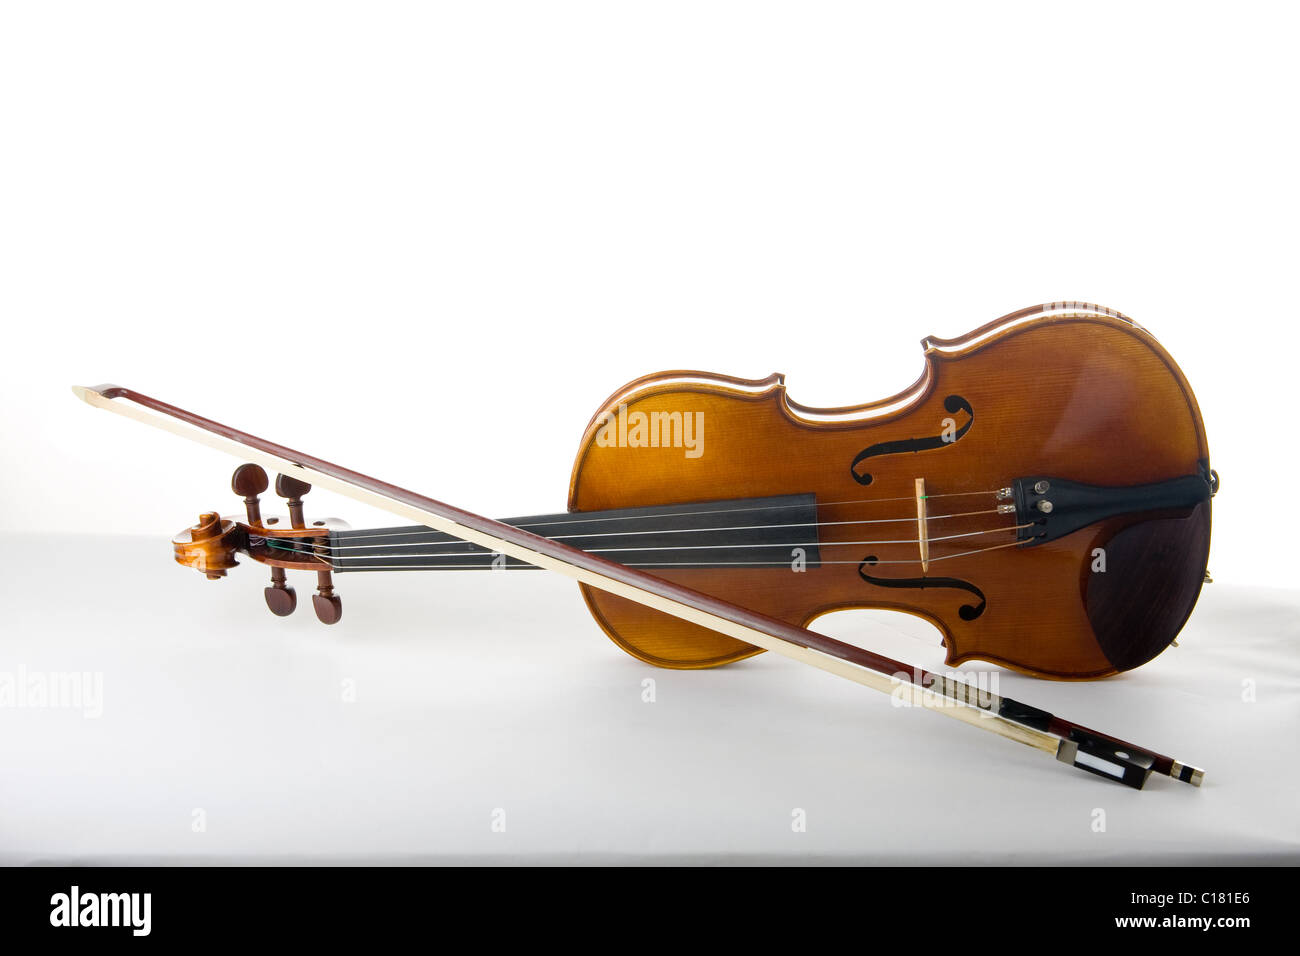 Classical violin or fiddle and bow on its side. Stock Photo